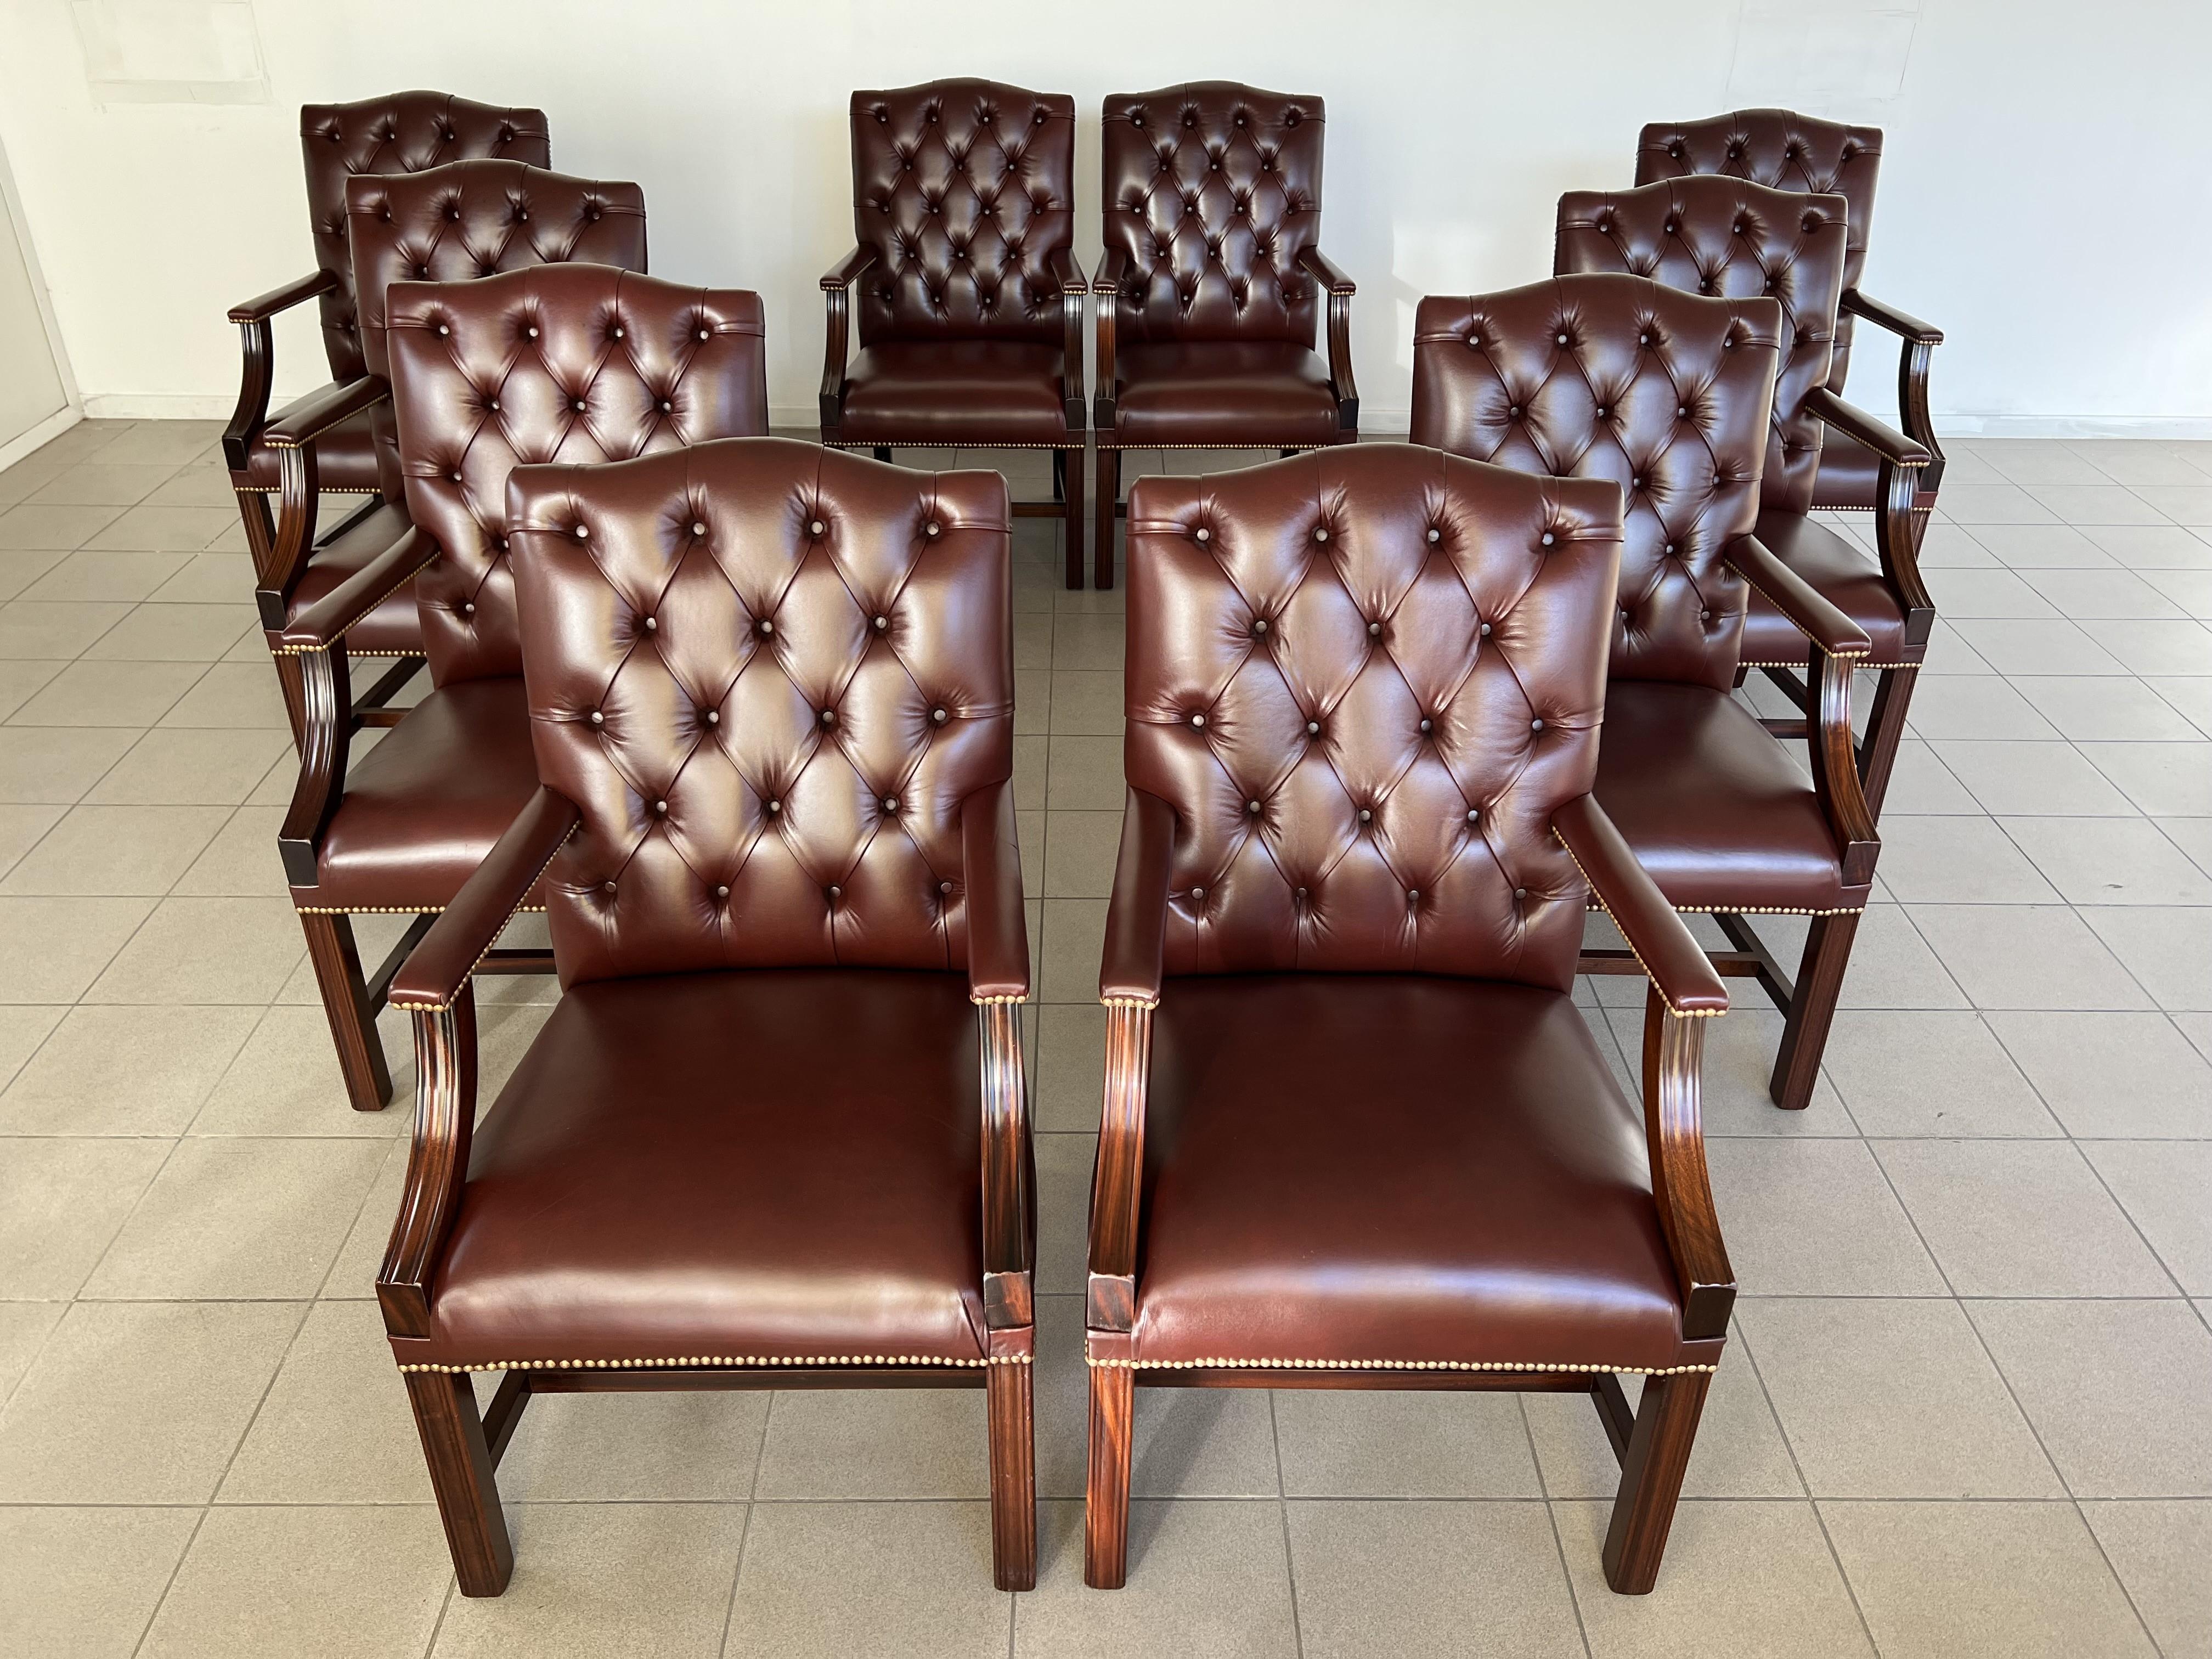 An impressive button back Gainsborough Chesterfield brown leather mahogany framed hall armchairs or dining chairs - Set of 10. Heavy and solid, these are an incredibly high quality pieces with nail-head trim individually placed by hand. Rare set of